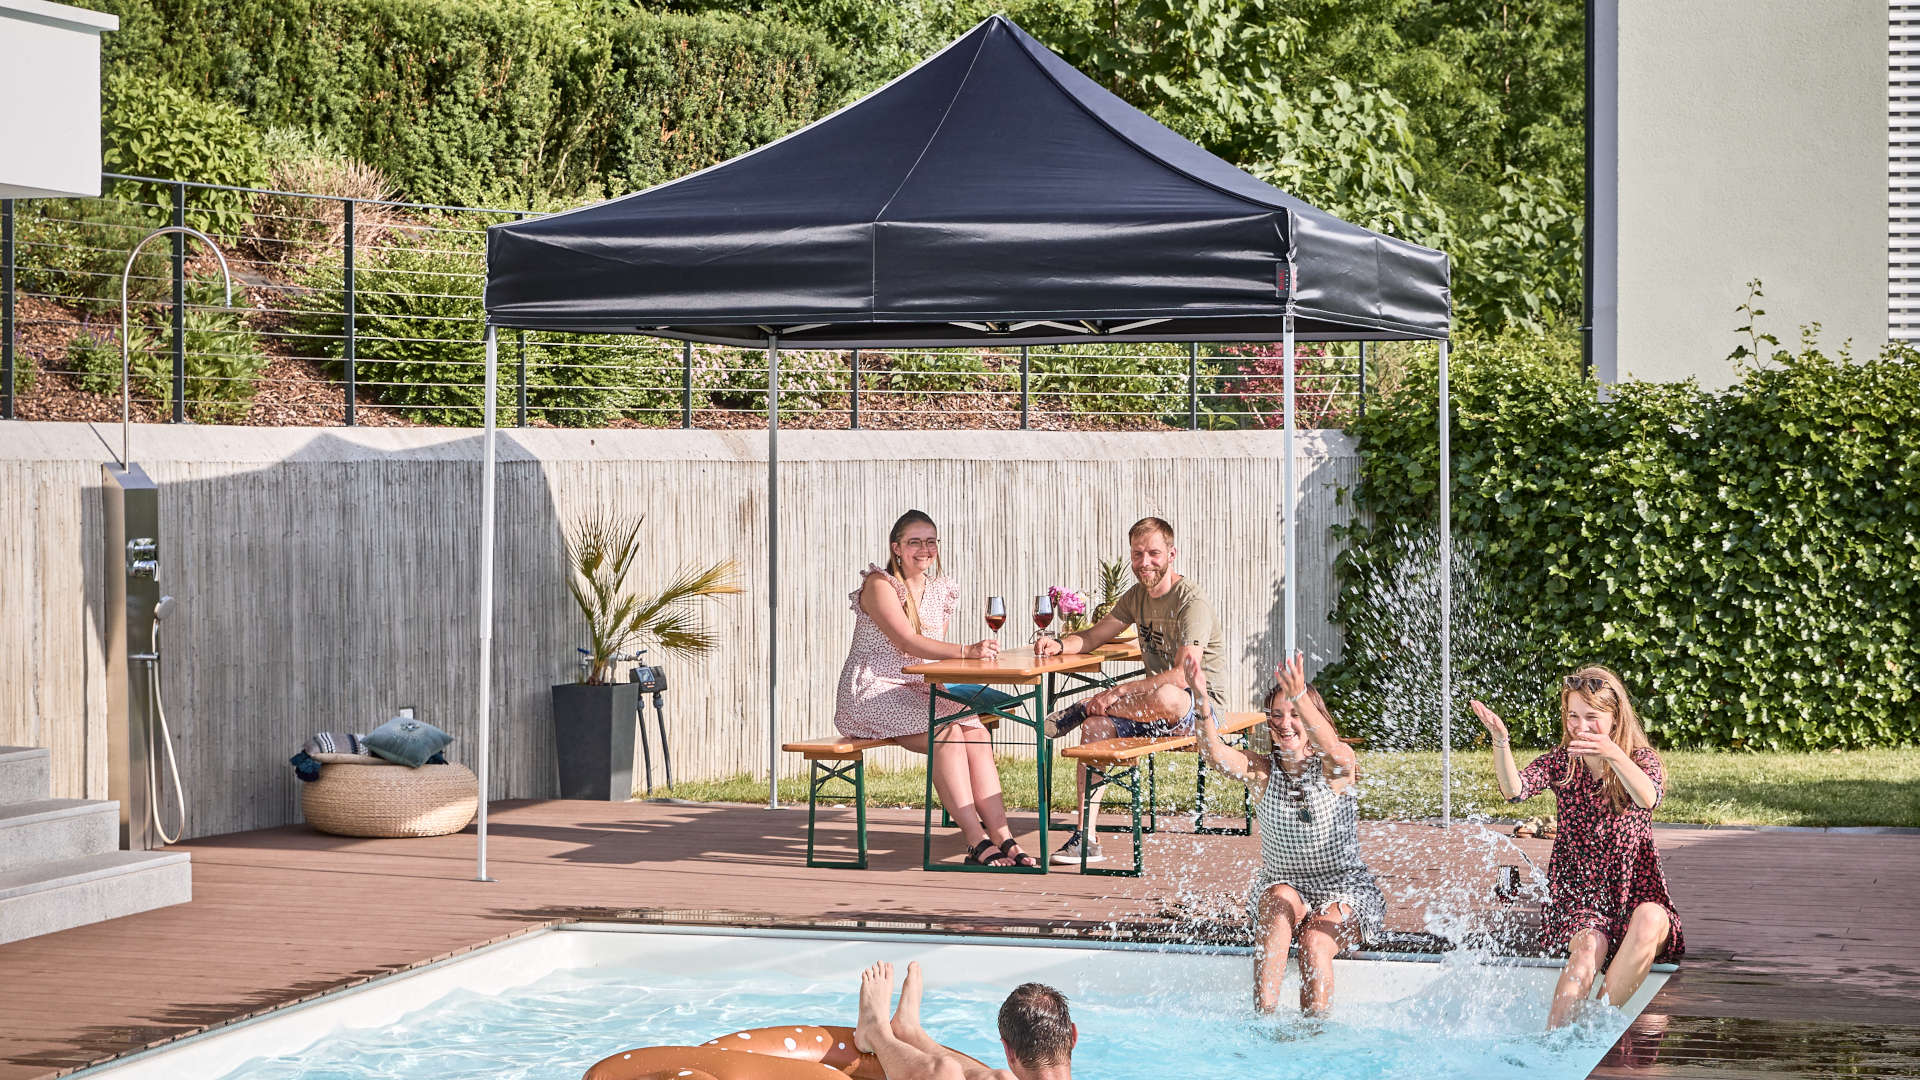 In the garden, the black 3x3 m folding canopy tent and classic beer garden table set. Friends spend the day in the garden and the pool.